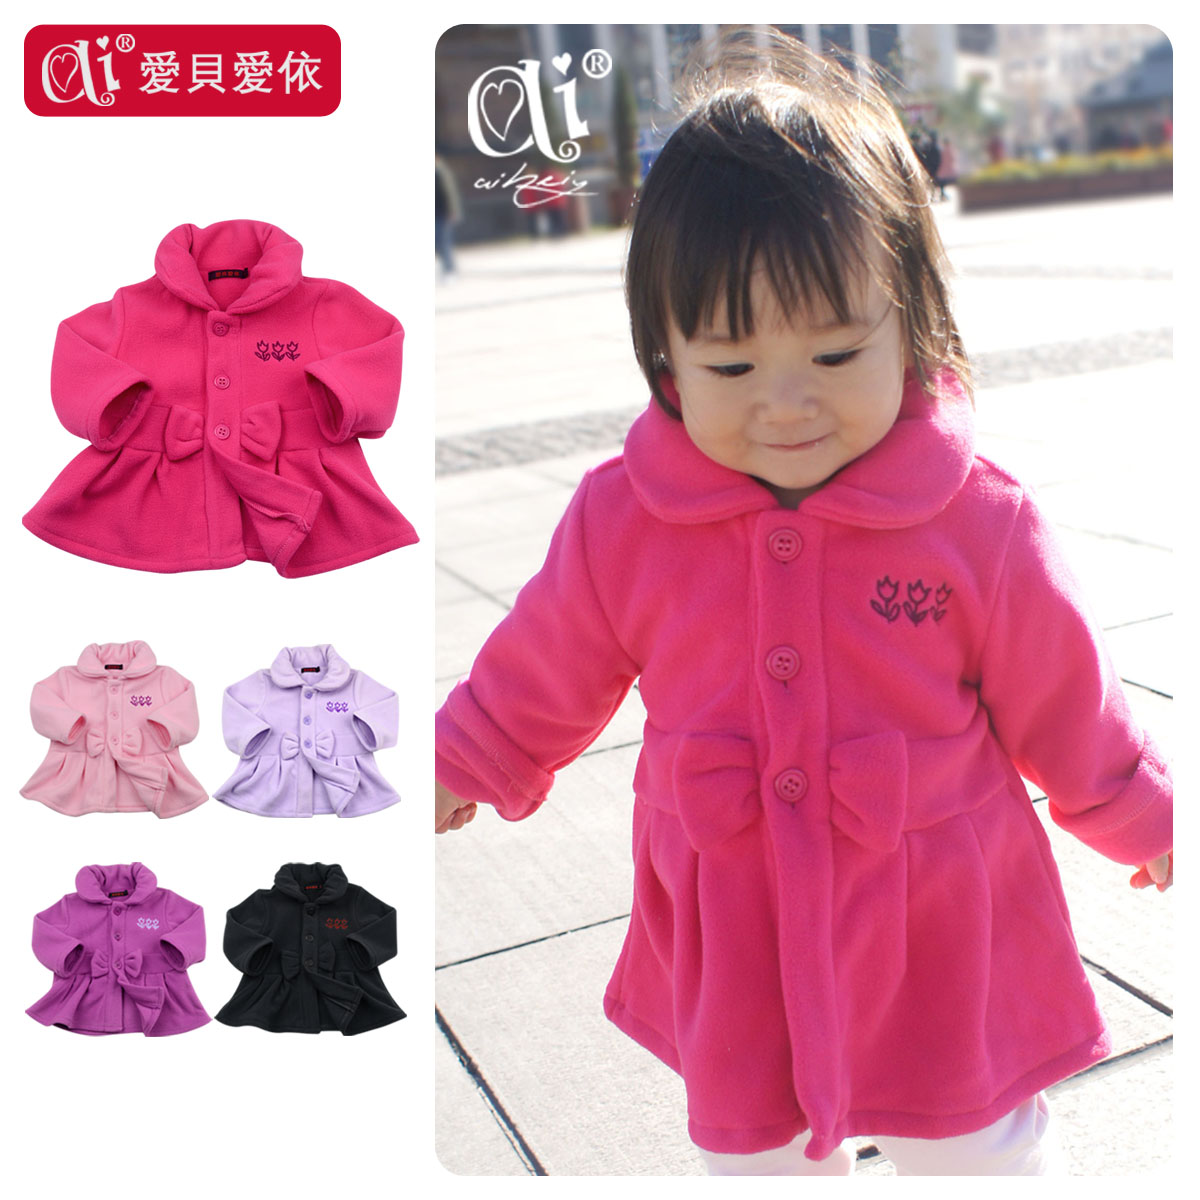 Autumn and winter baby cardigan clothes newborn clothes infant thermal thickening top